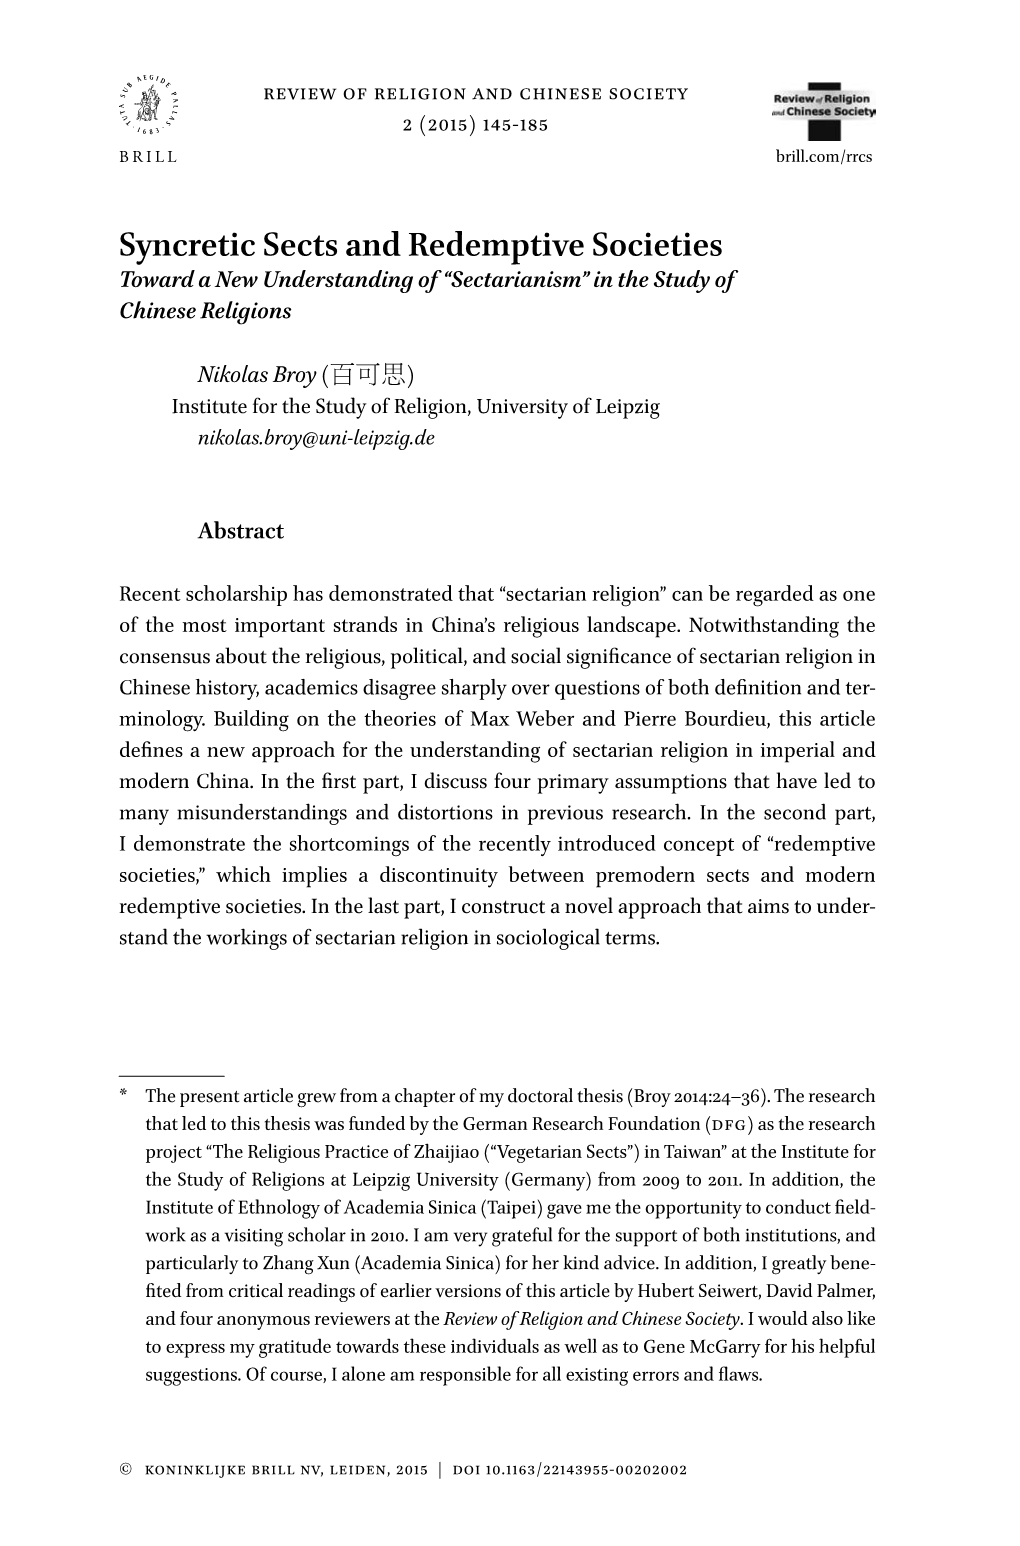 Syncretic Sects and Redemptive Societies Toward a New Understanding of “Sectarianism” in the Study of Chinese Religions